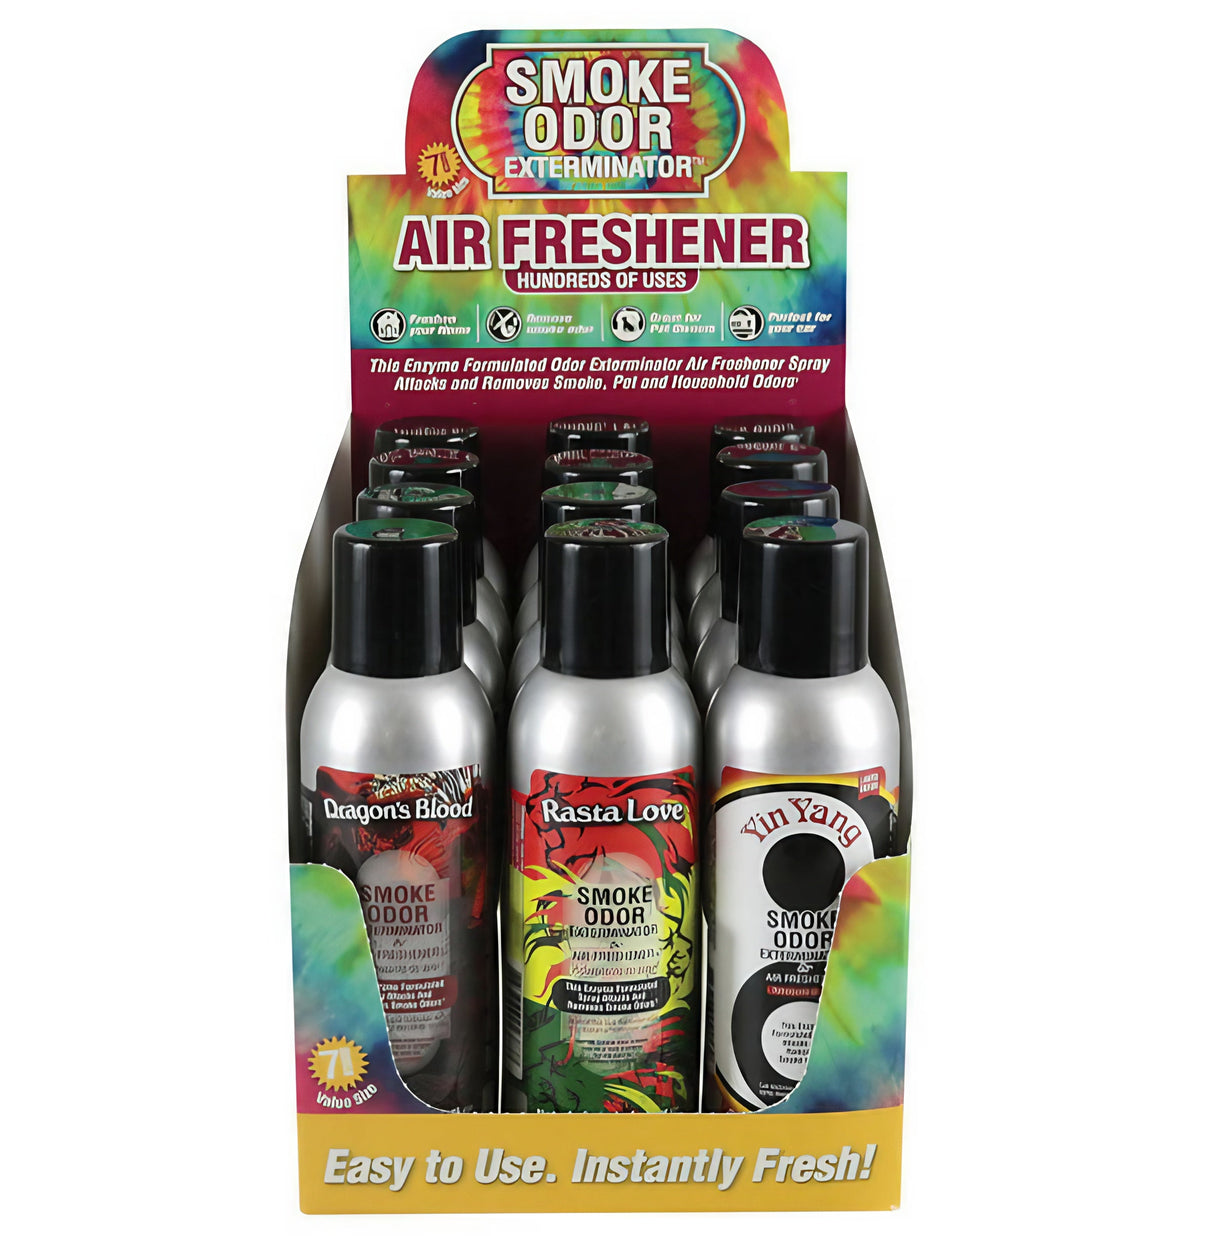 Smoke Odor Exterminator Spray 12 Pack in assorted scents for home freshness